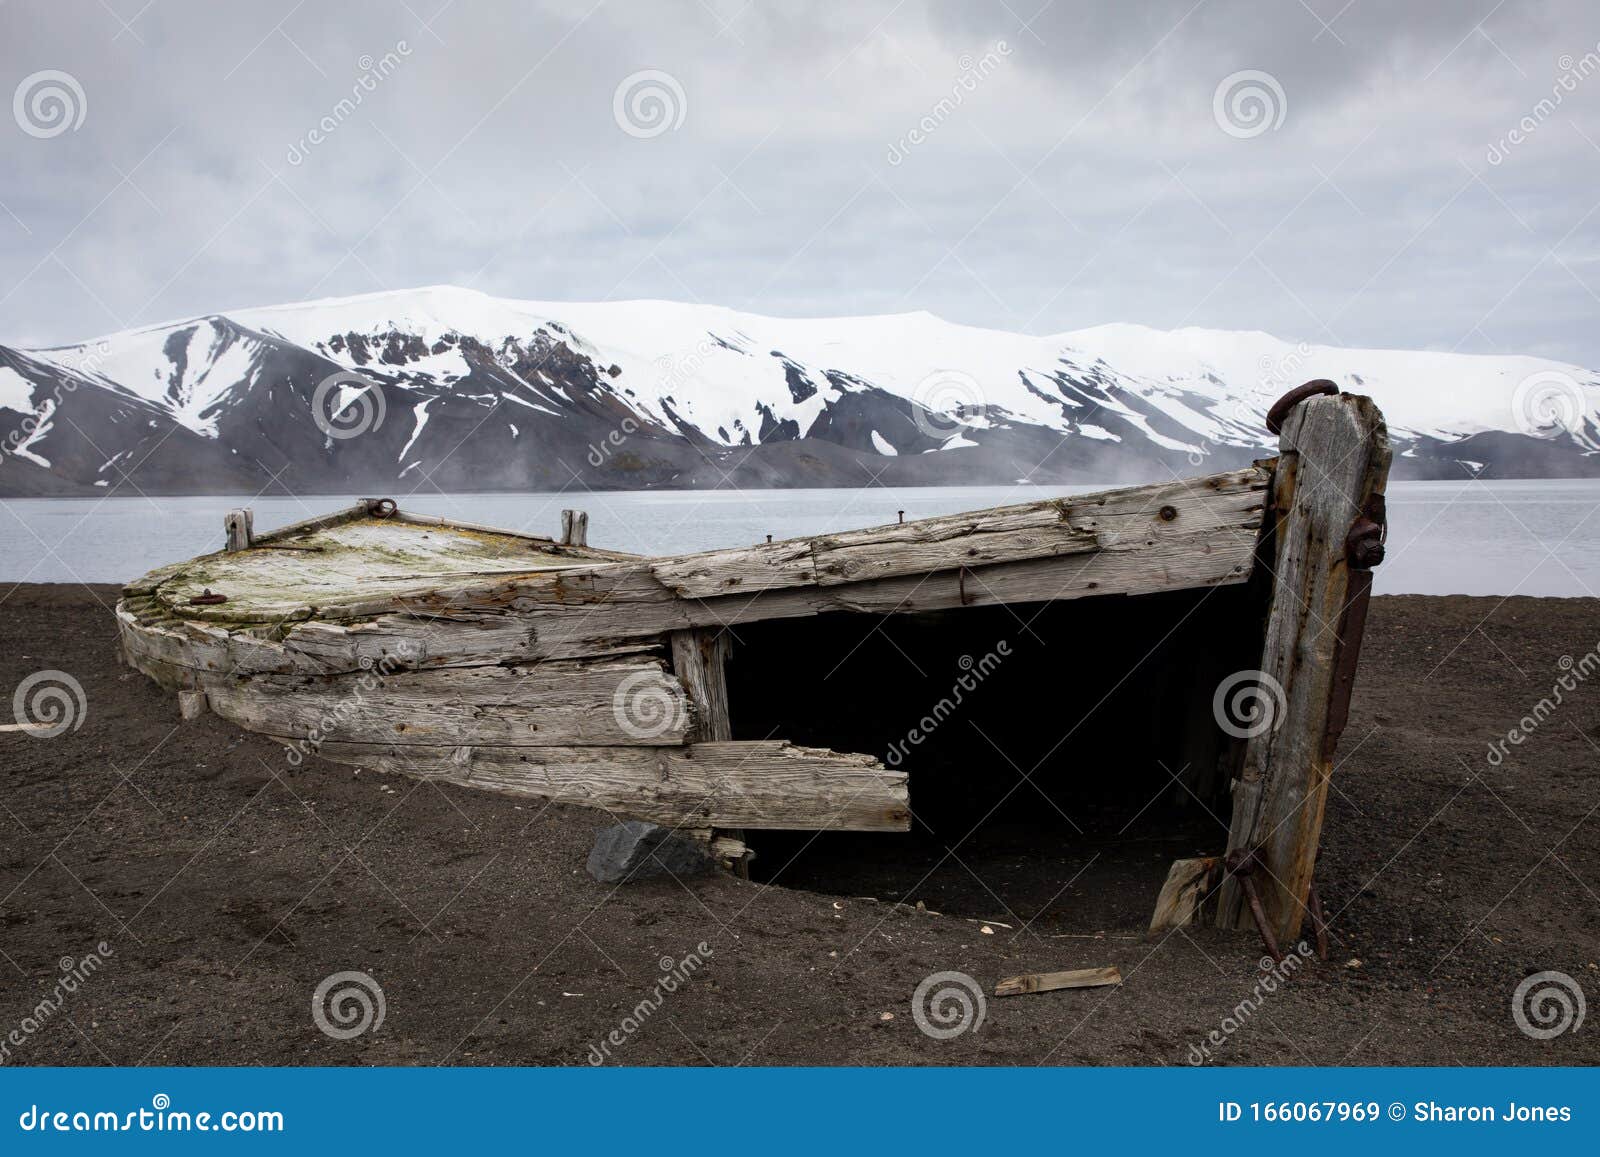 old wooden whaling boat on the beach at whaler`s bay, antarctica